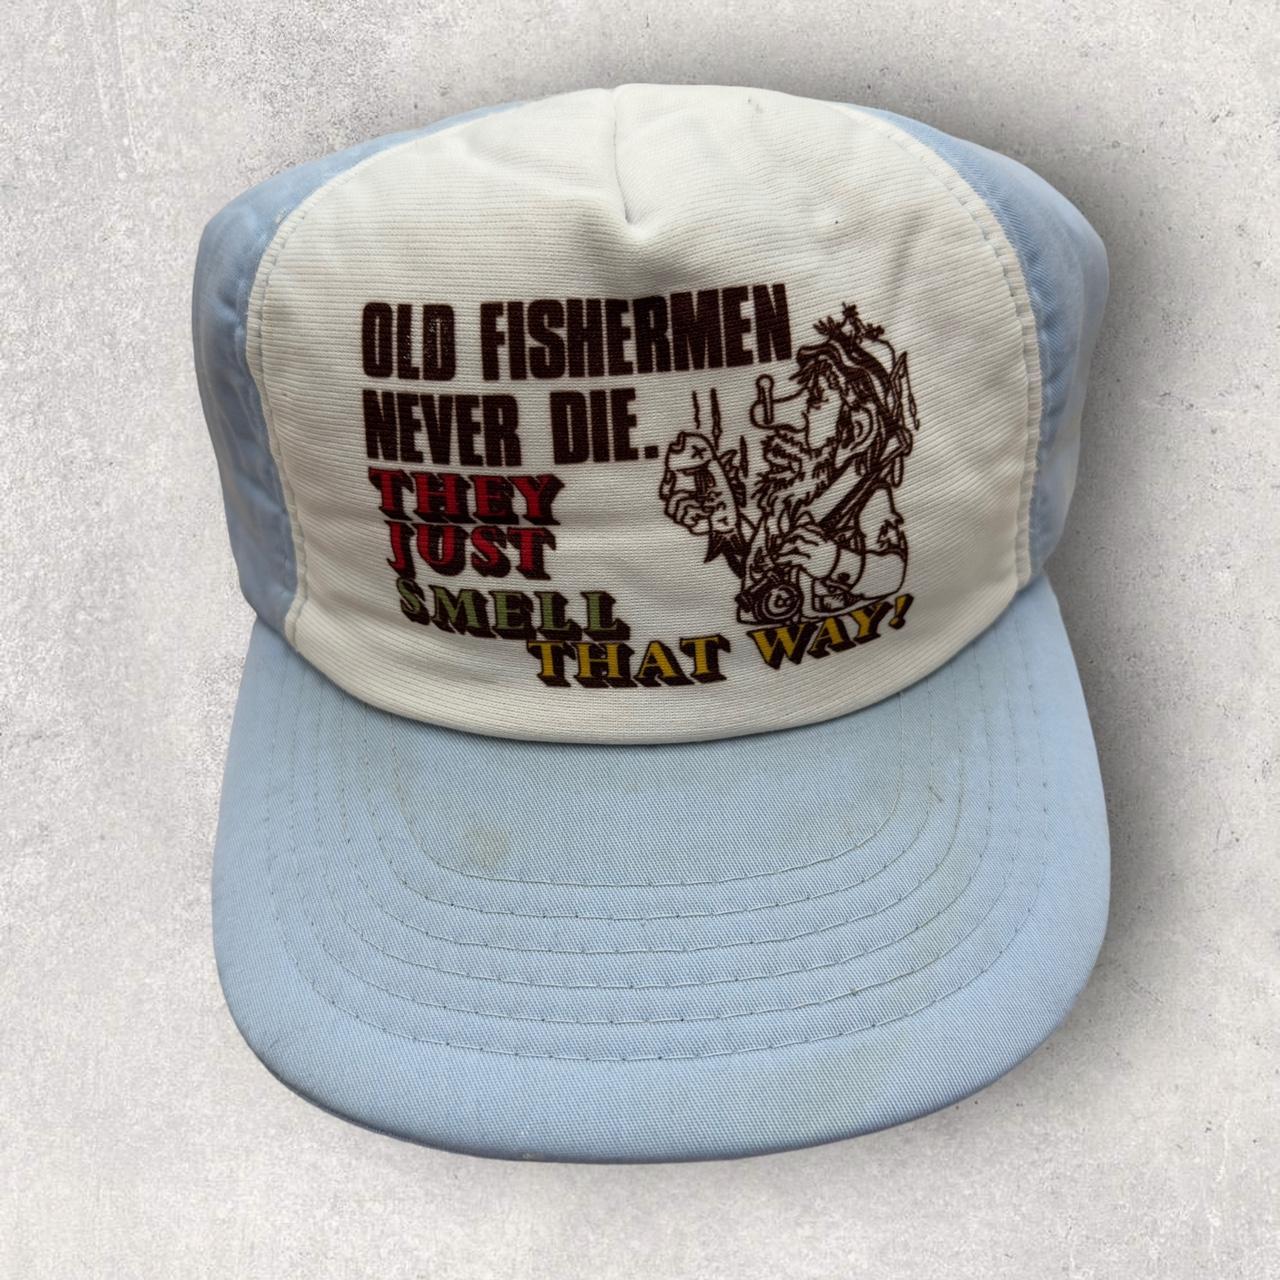 Vintage fishing snapback hat in light blue. From the